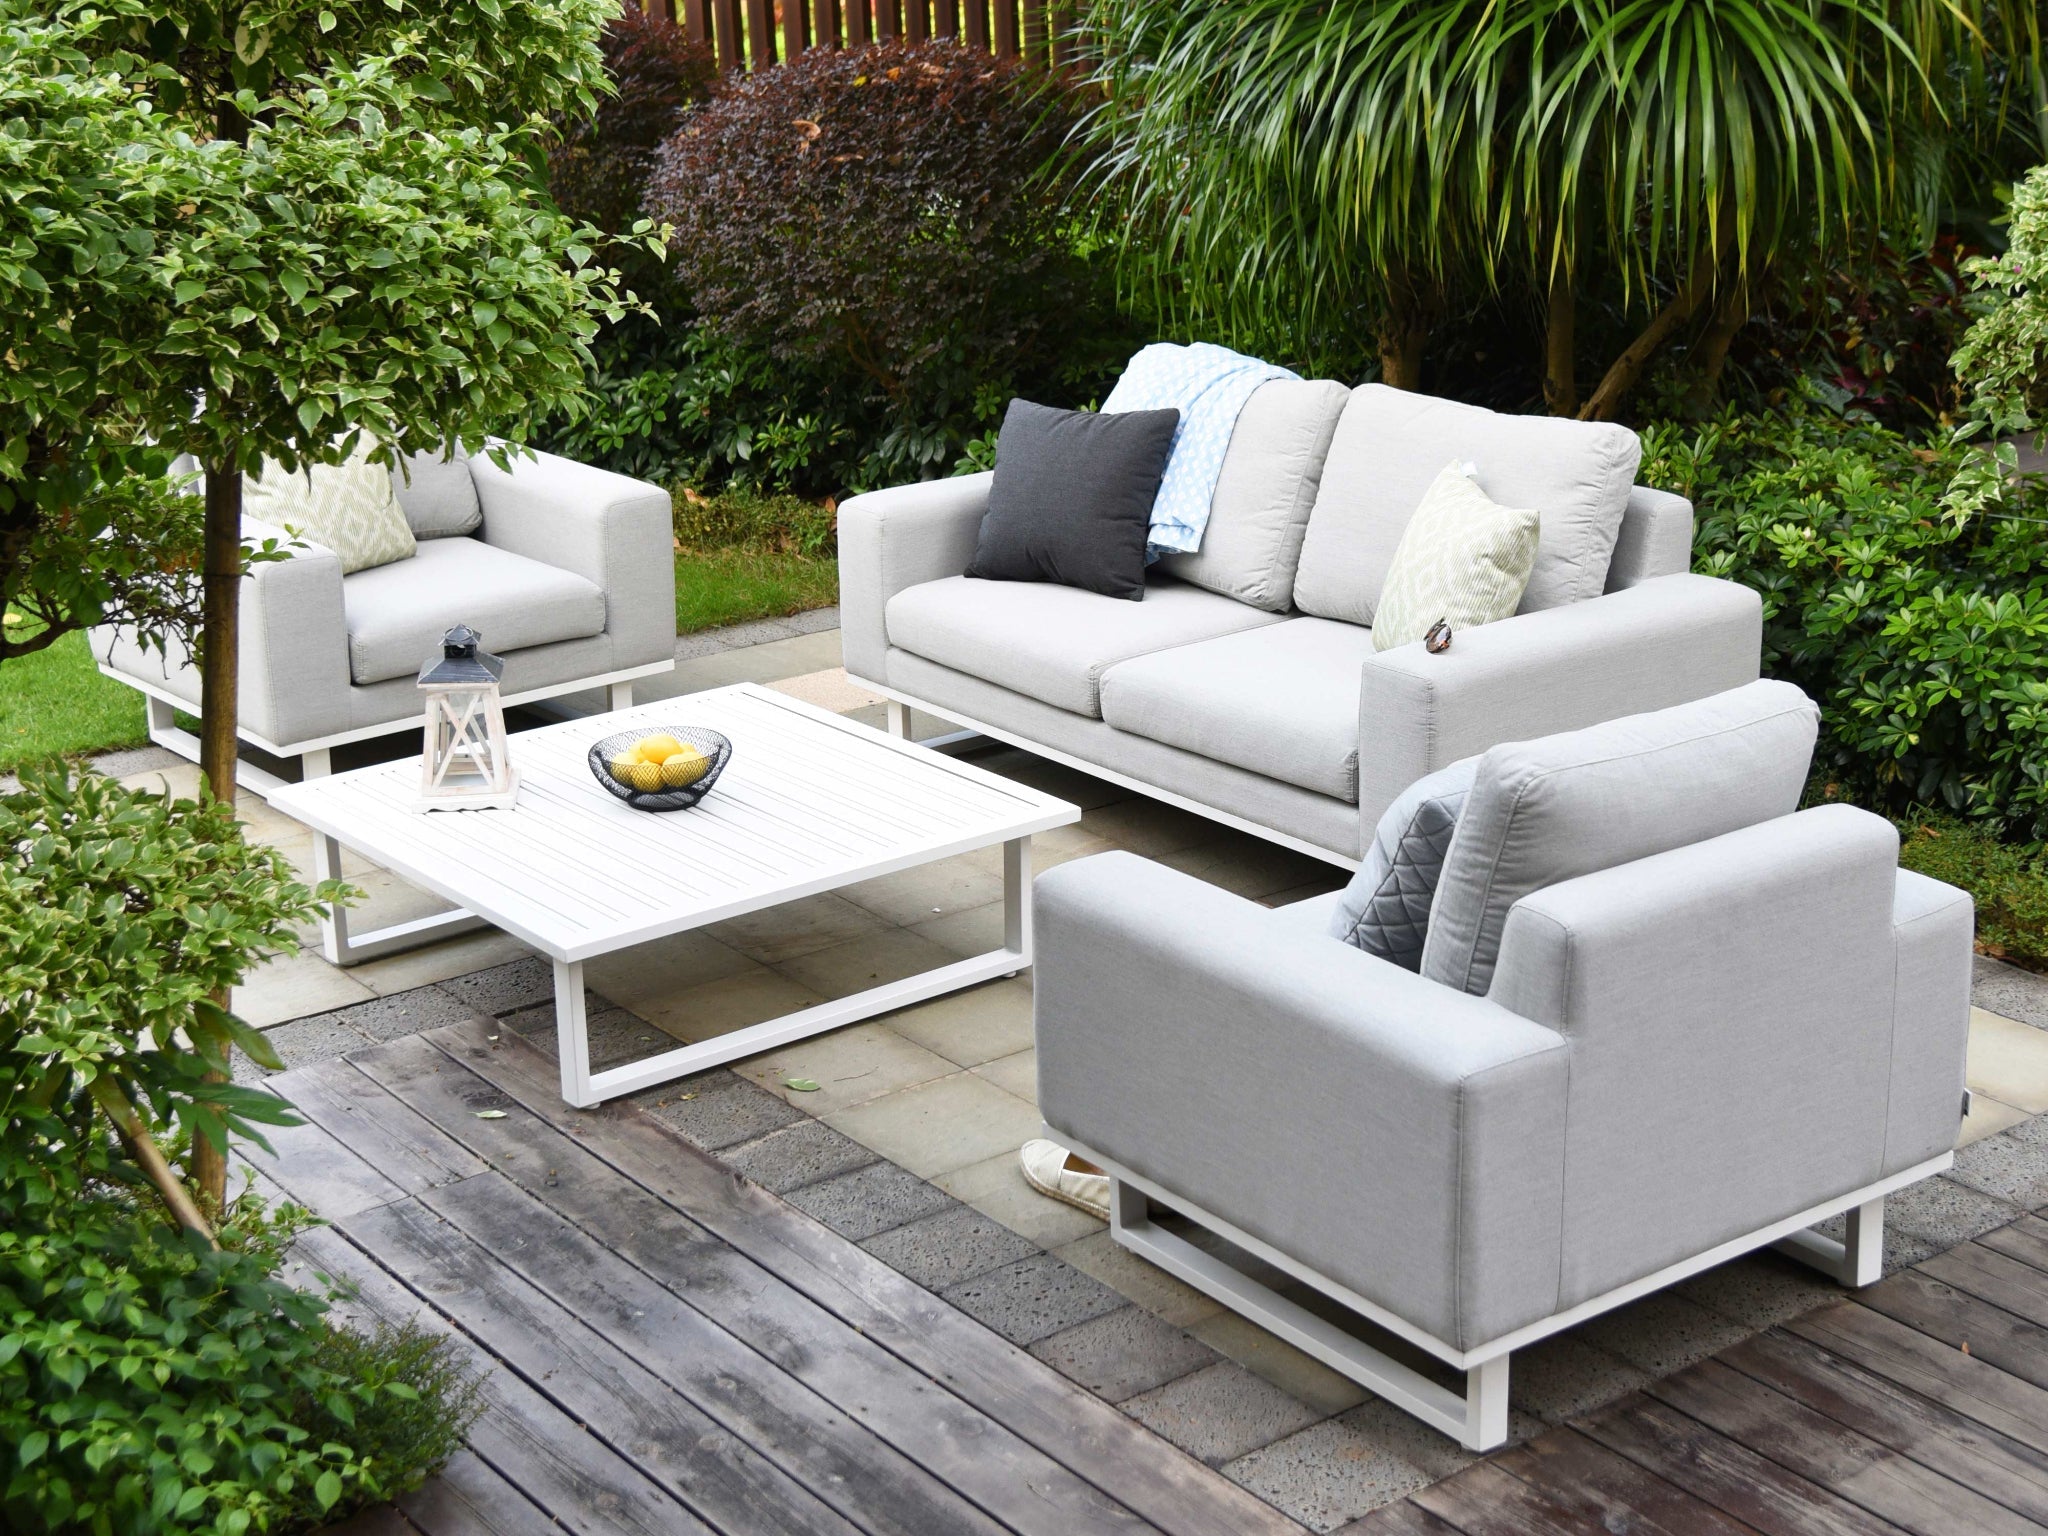 SIMPO Ethos 4-Piece Outdoor Lounge Setting (2-Seater) — Lead Chiné